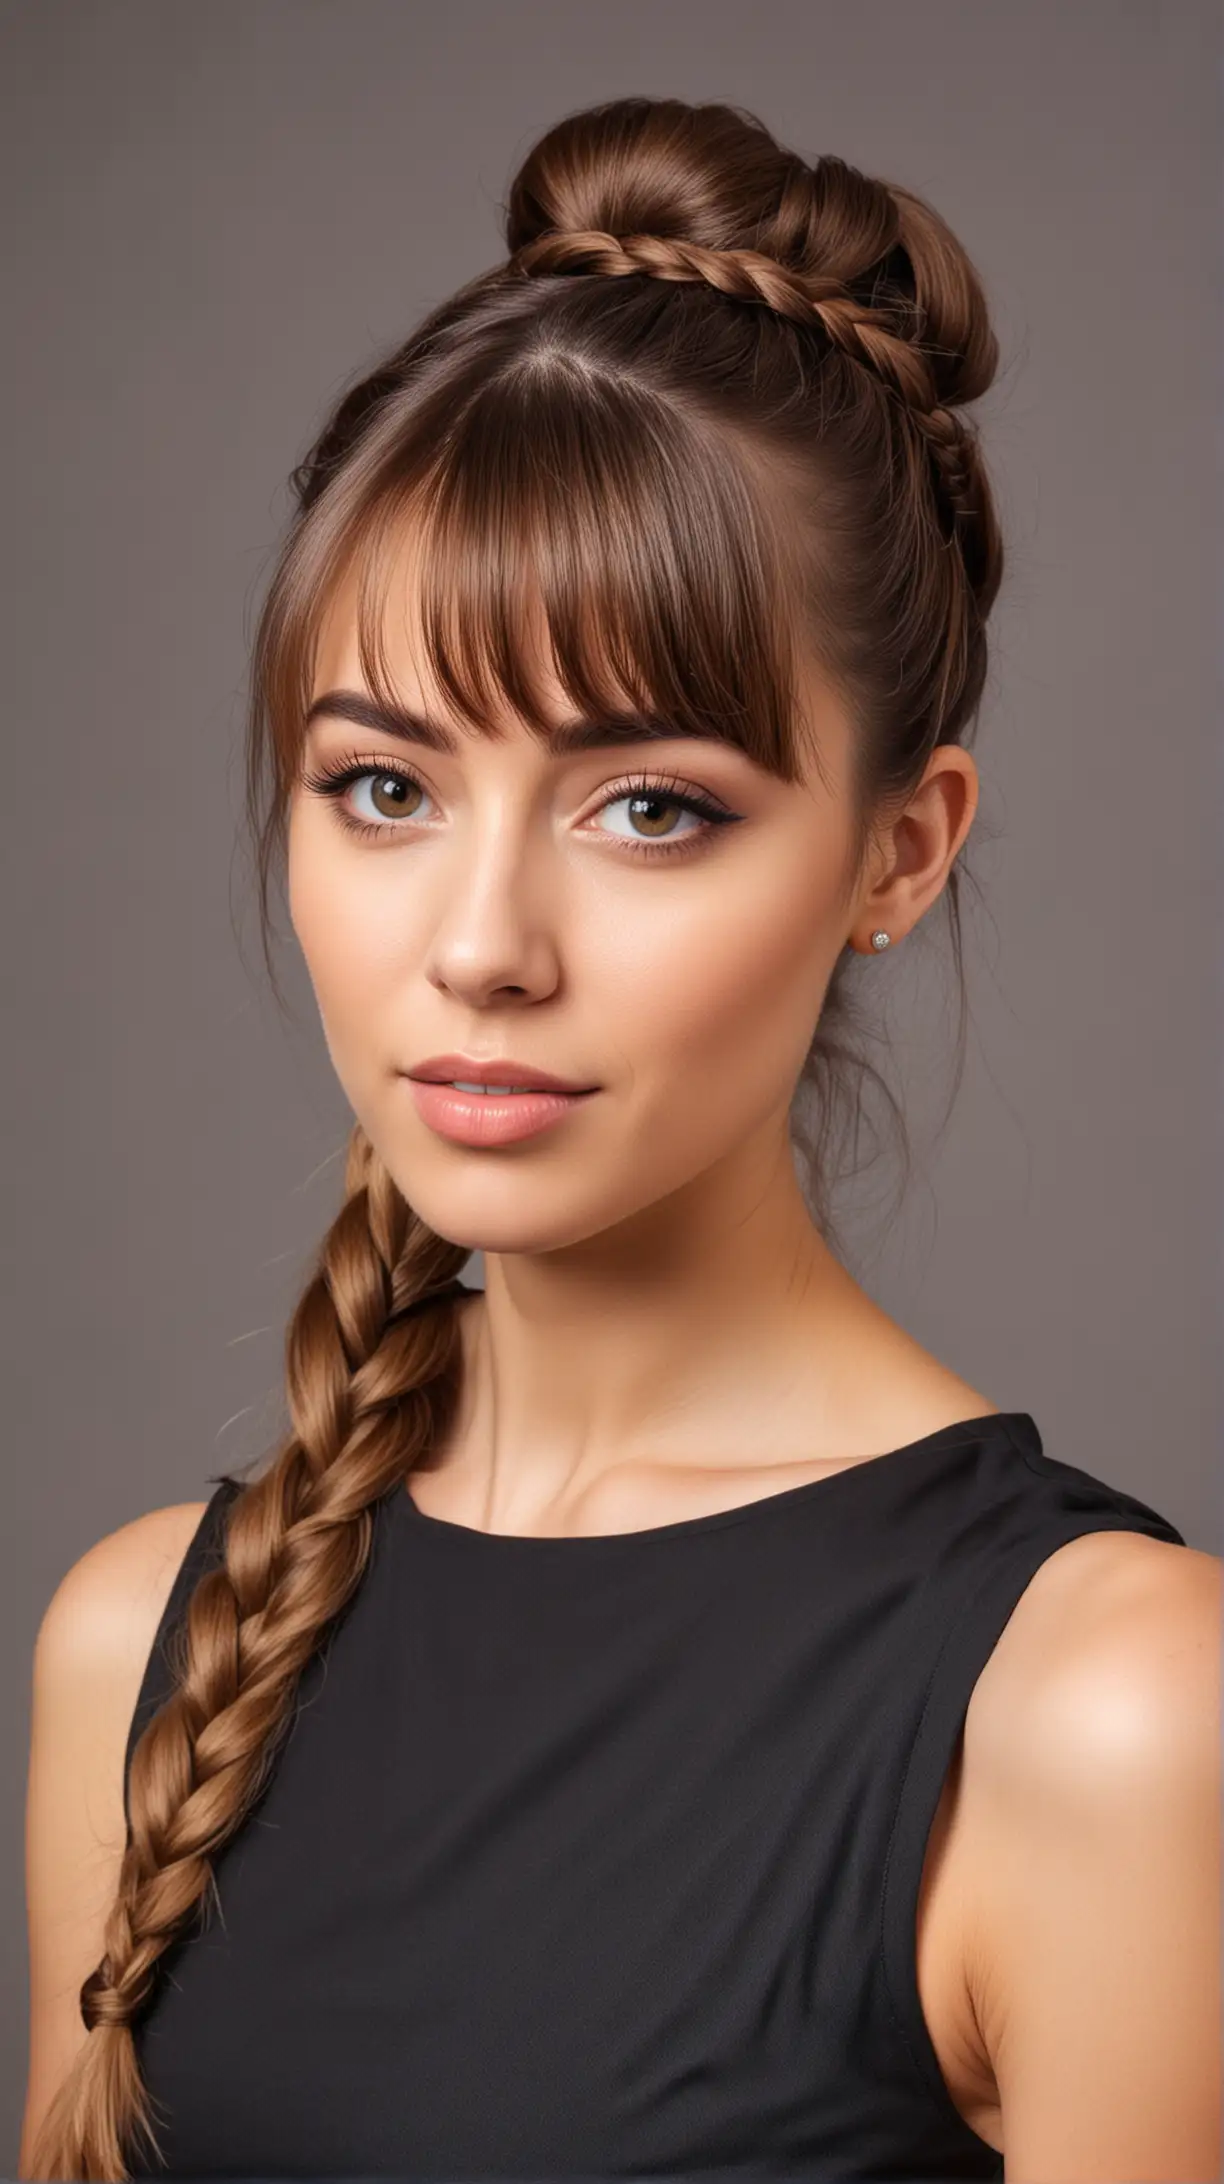 Elegant 30YearOld Woman with Braided Crown Ponytail Formal Event Hairstyle